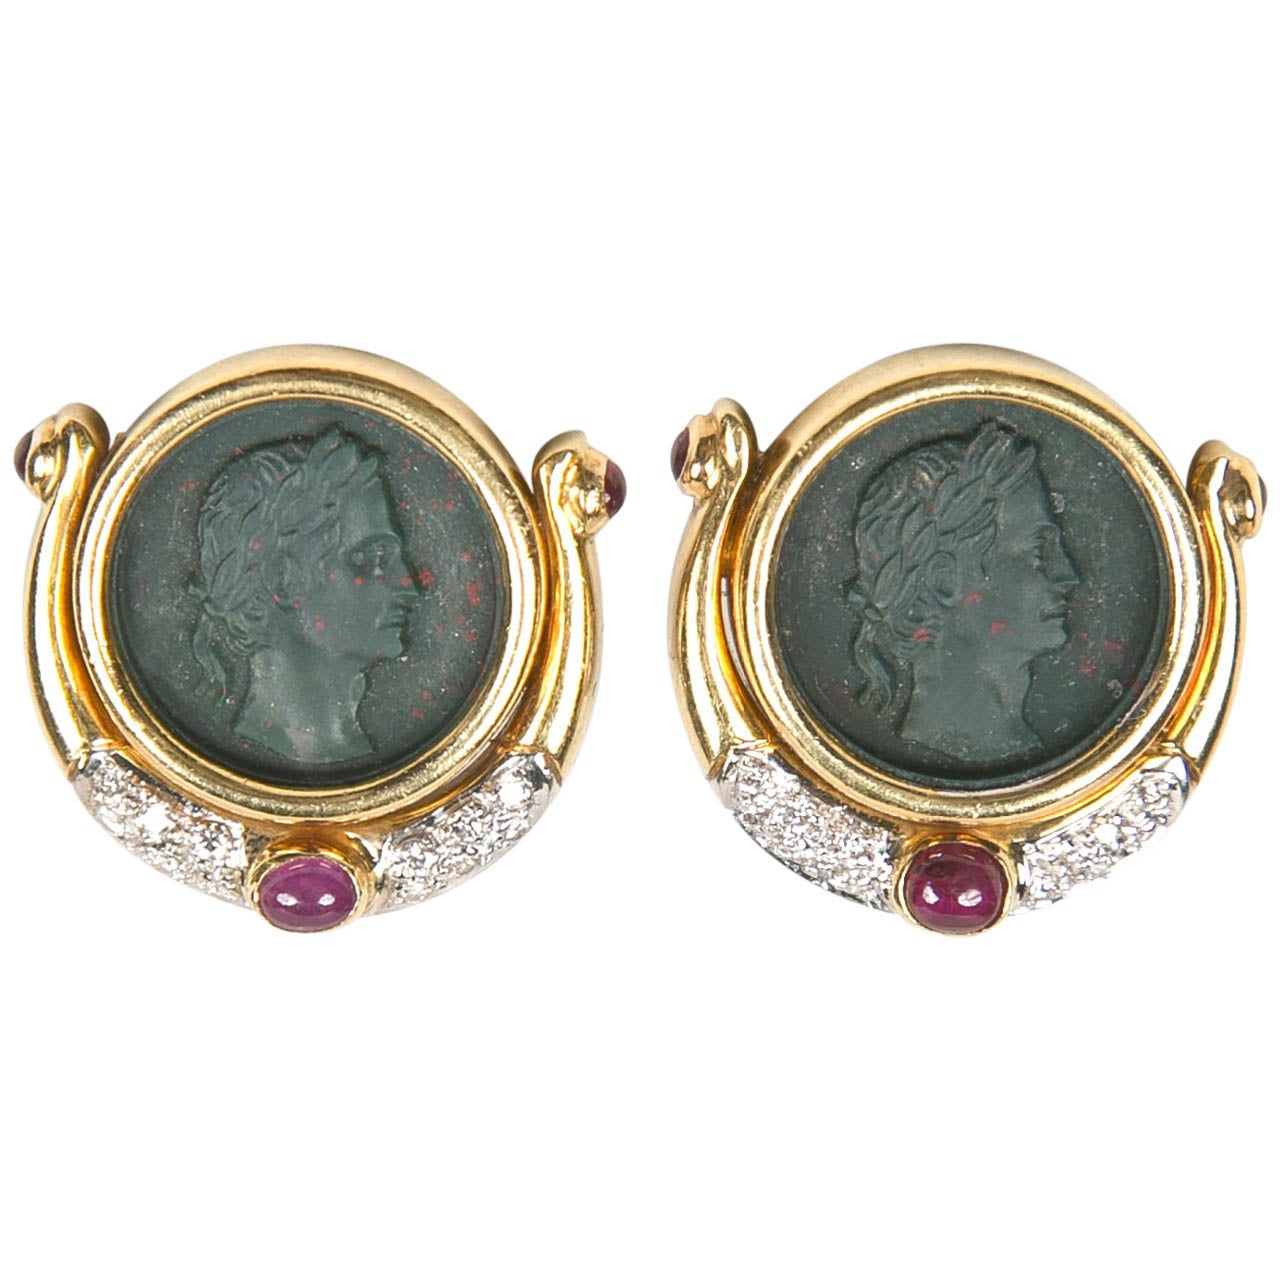 Ancient Roman Italian Coin Earrings Presented By Carol Marks